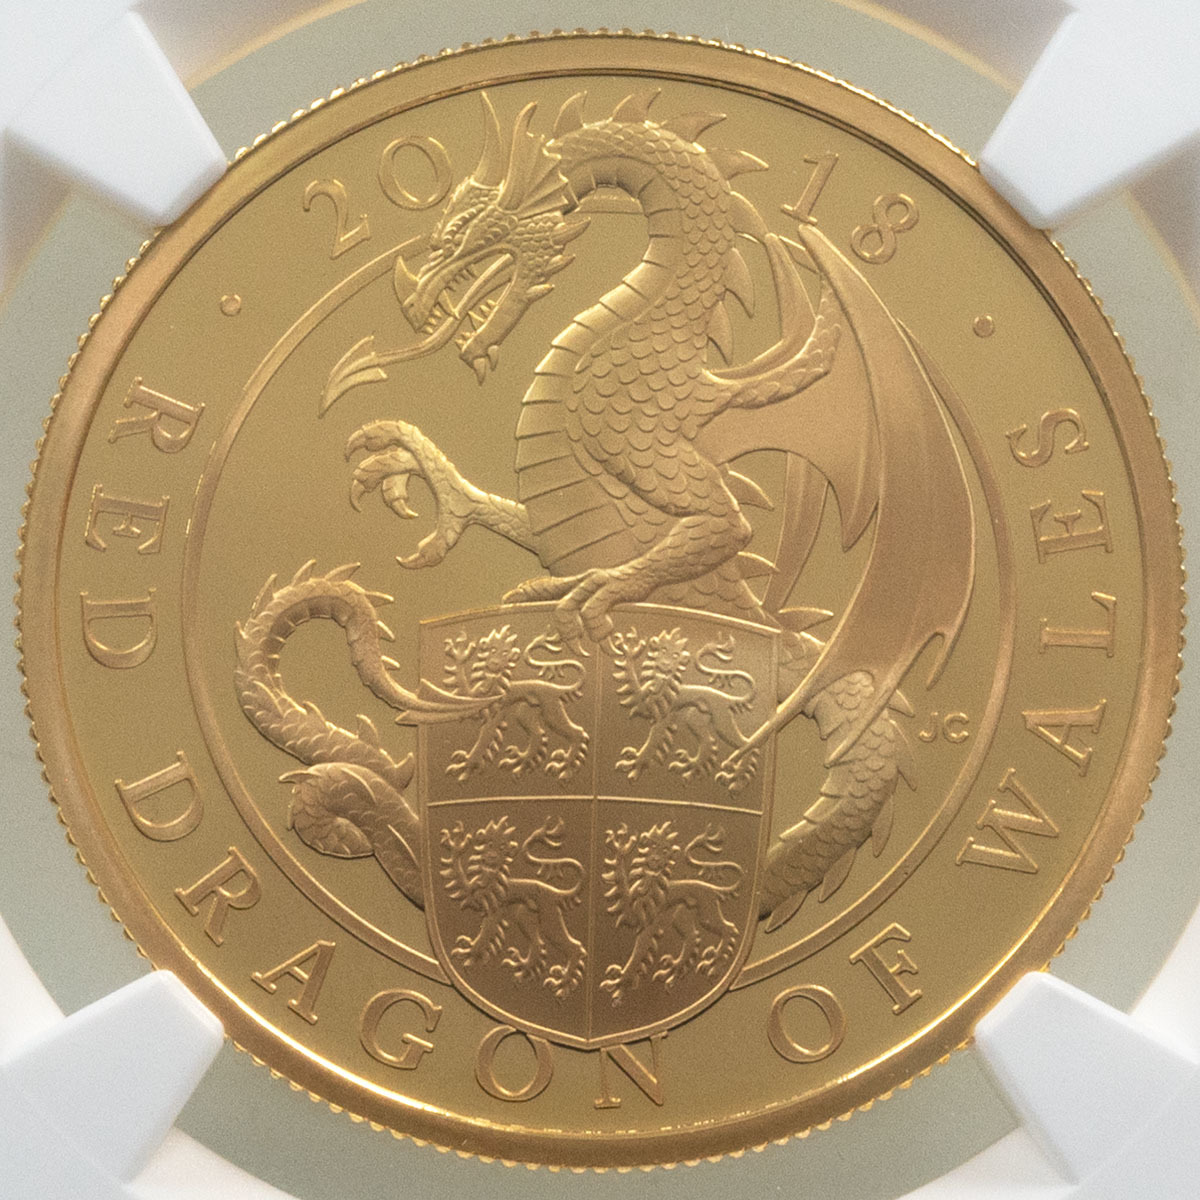 UK18QDGP 2018 Queen's Beasts Red Dragon Of Wales One Ounce Gold Proof Coin NGC Graded PF 70 Ultra Cameo Reverse